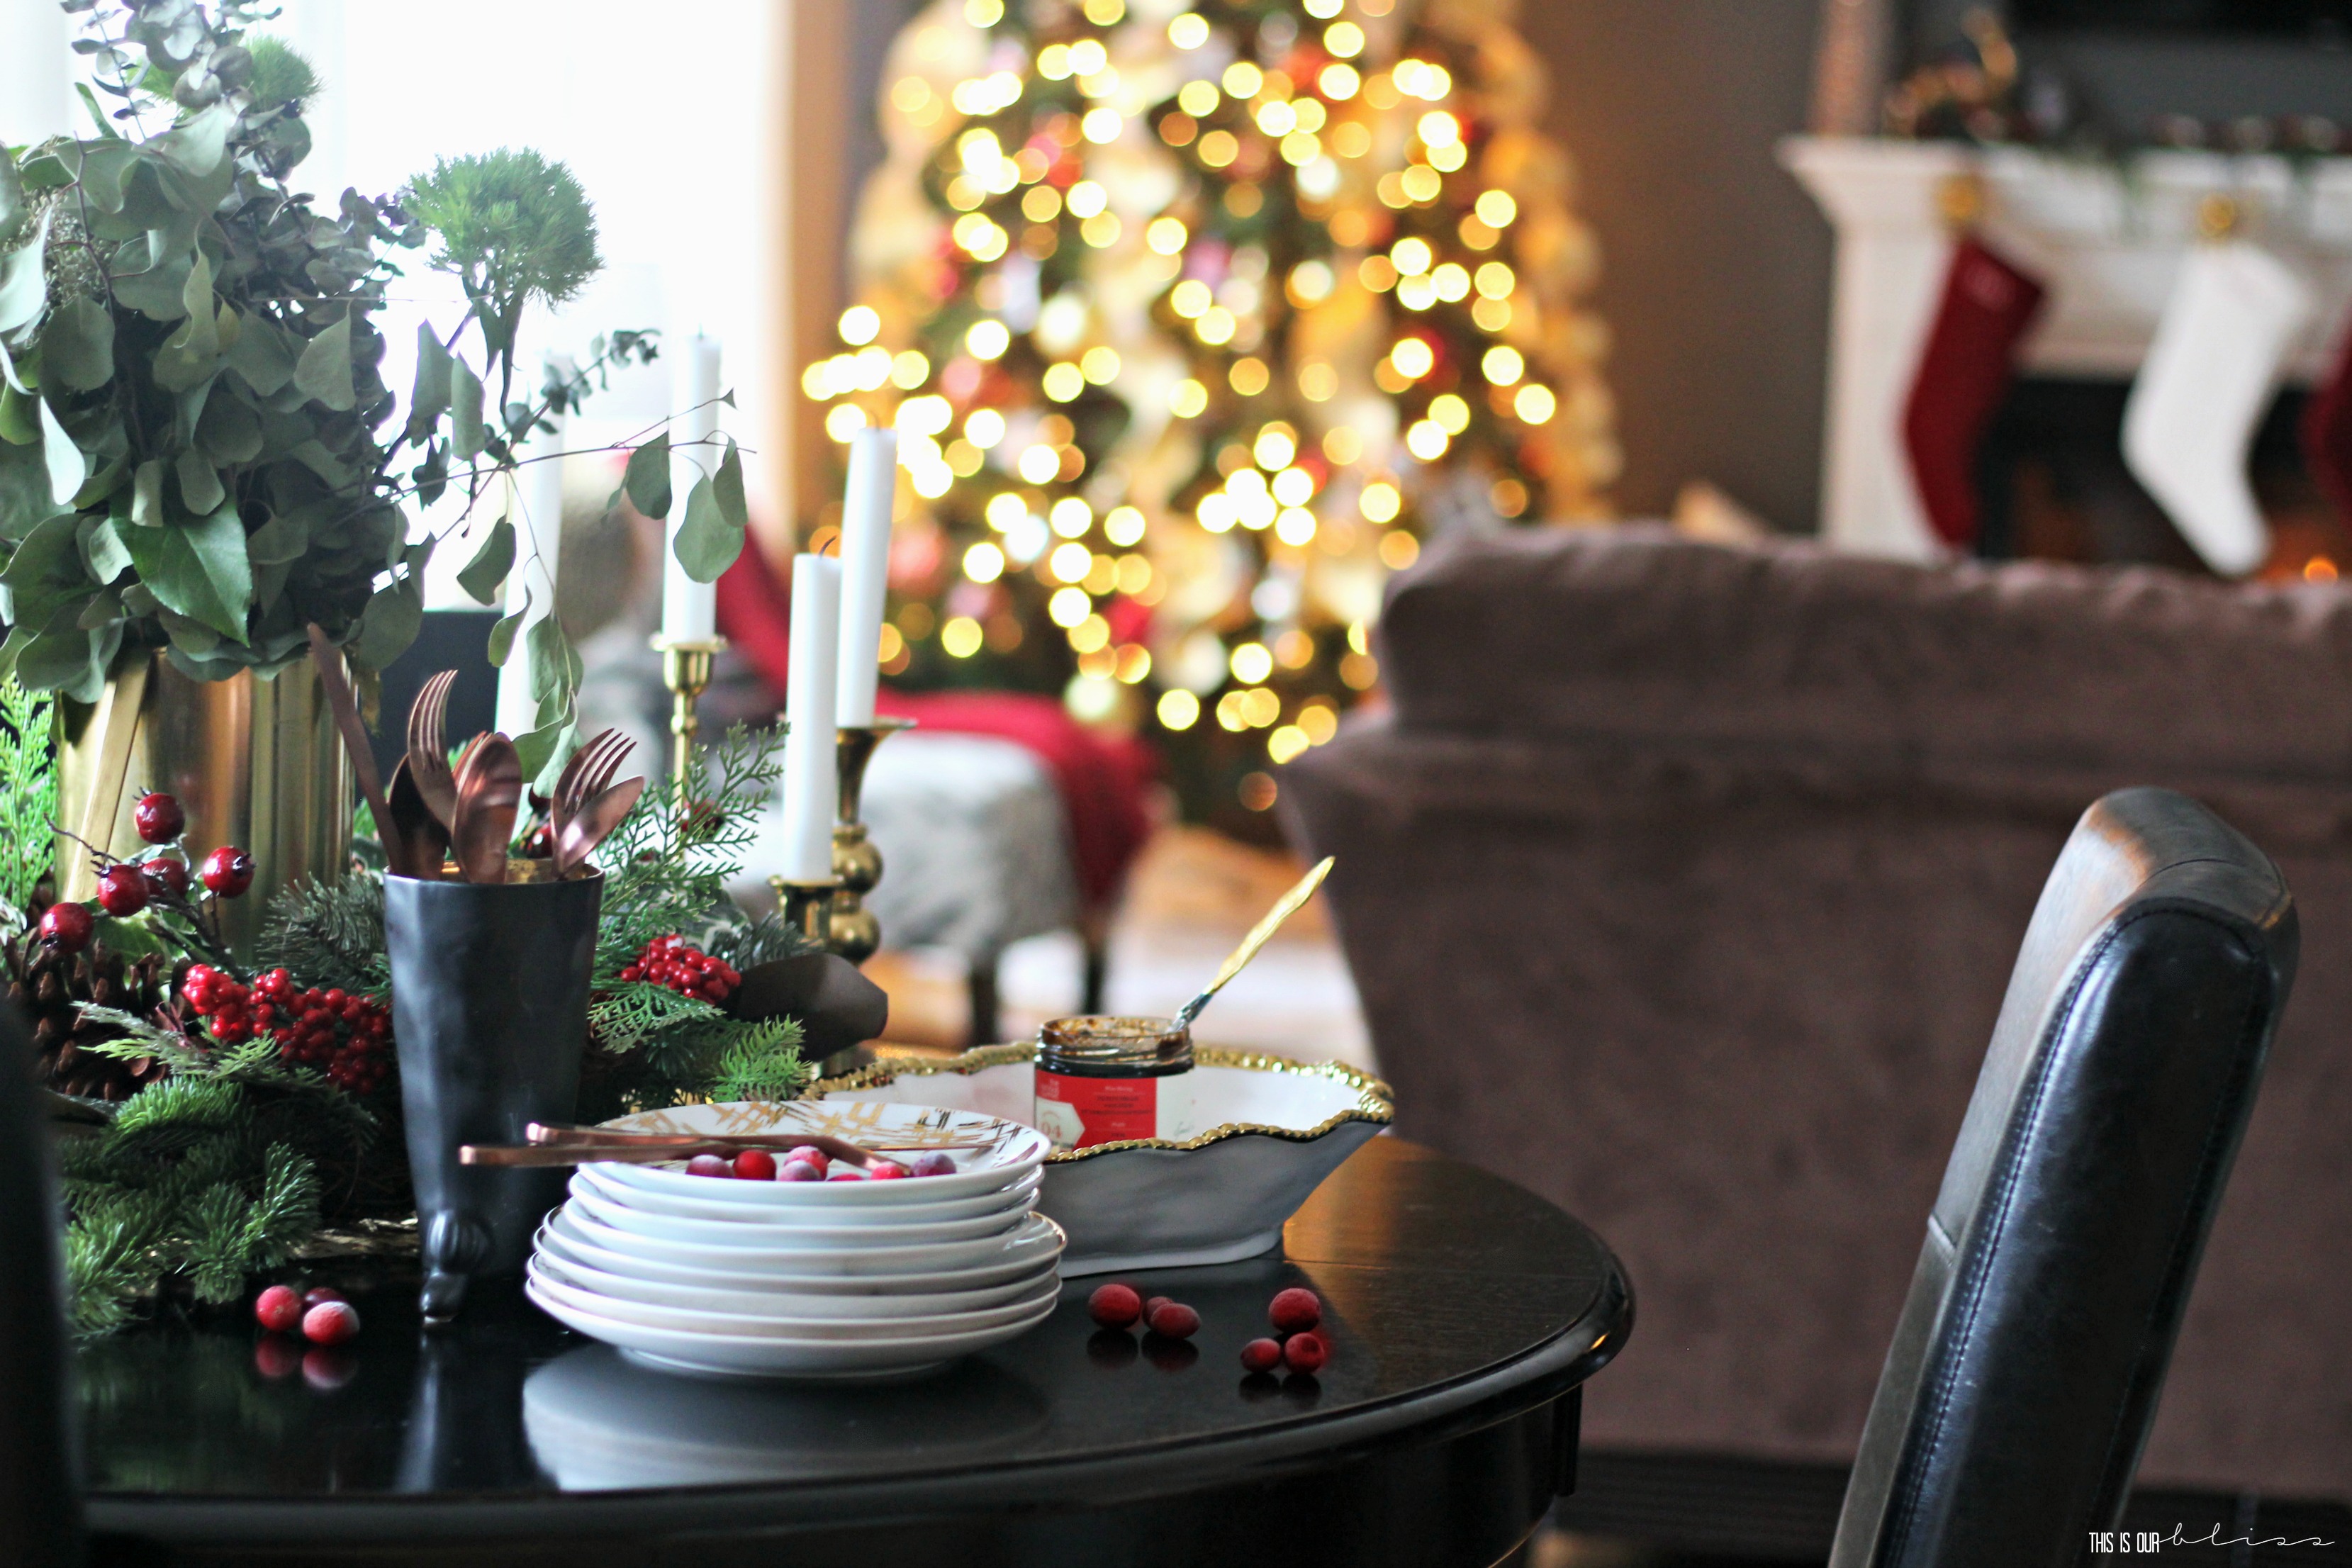 A Merry and Metallic Christmas Home Tour | Red white and metallic Christmas Family room, breakfast table, Tree and Mantel | This is our Bliss Christmas Home Tour 2016